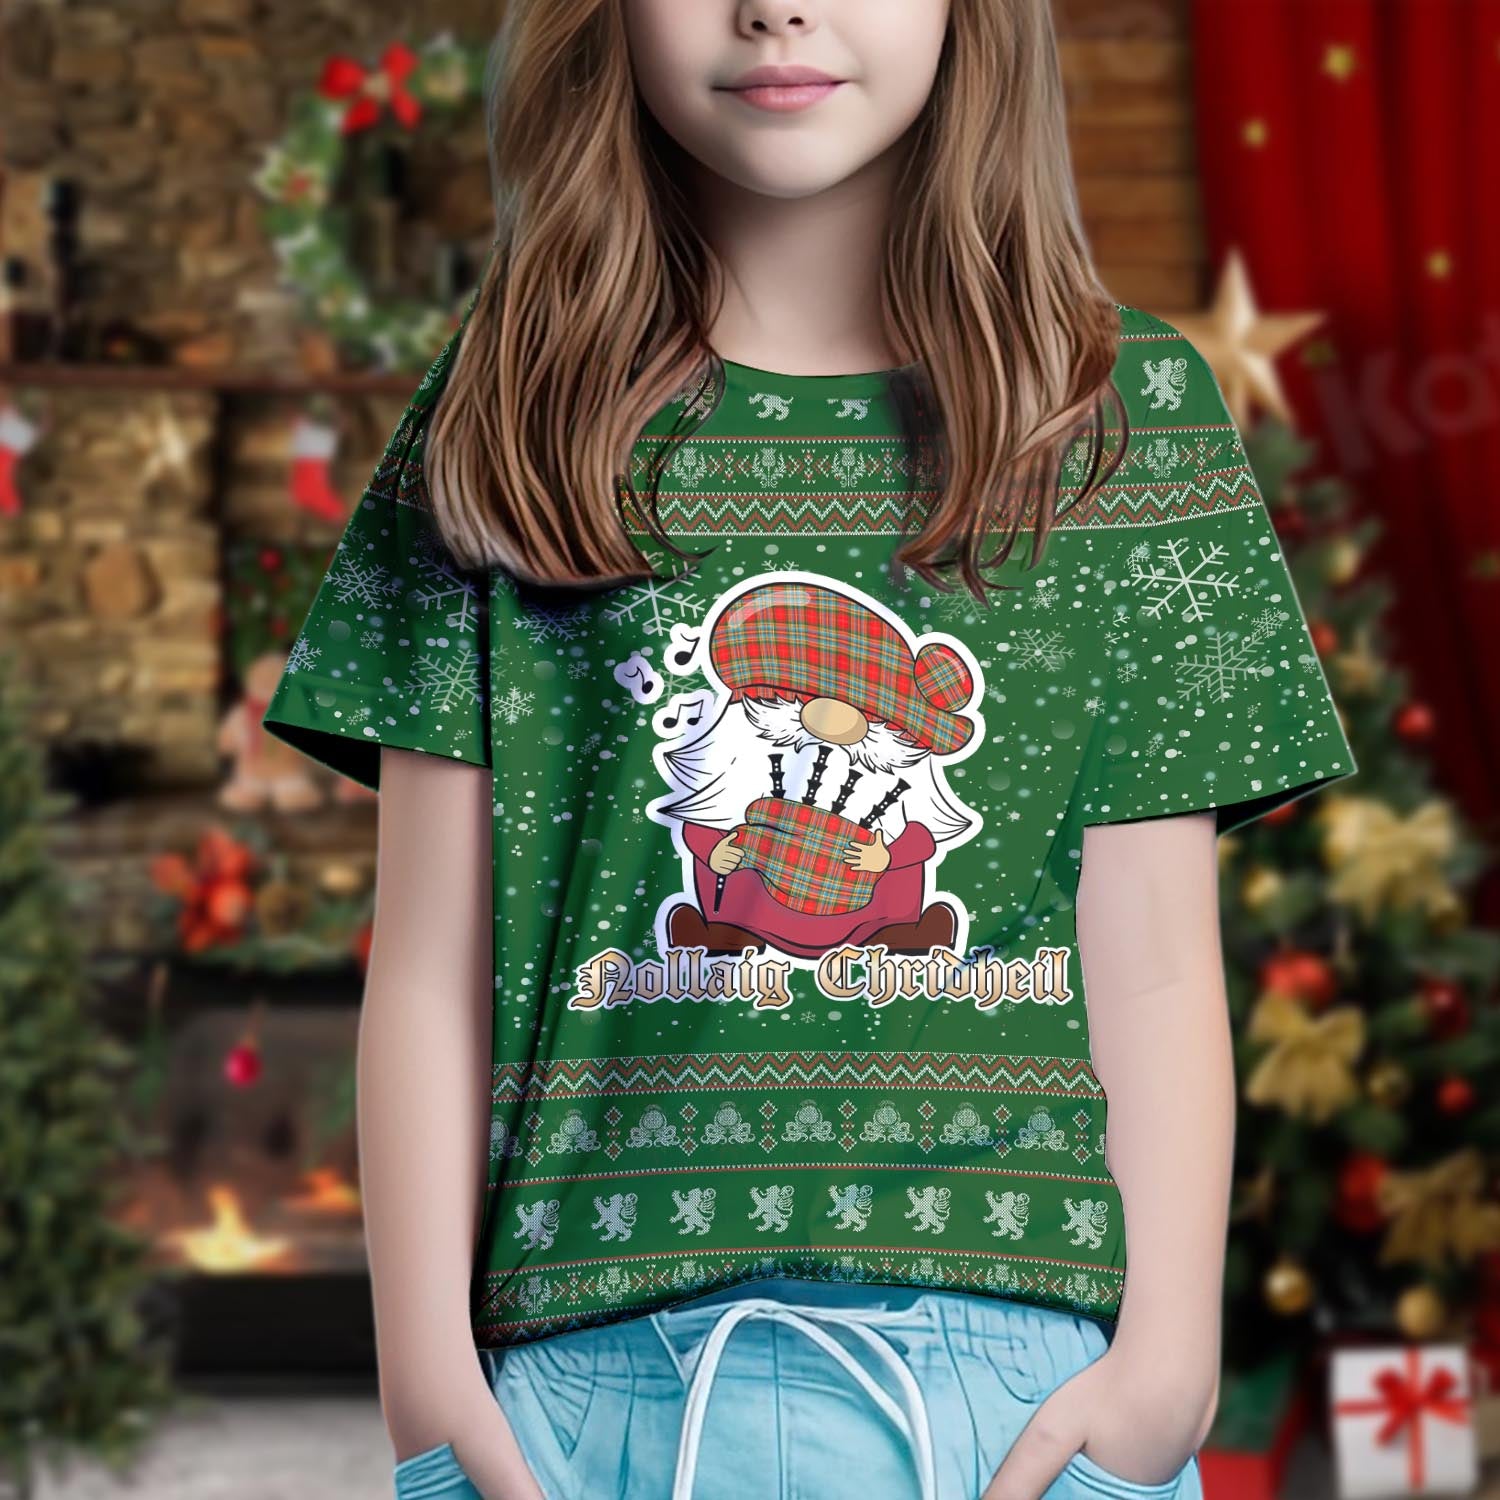 Chattan Clan Christmas Family T-Shirt with Funny Gnome Playing Bagpipes Kid's Shirt Green - Tartanvibesclothing